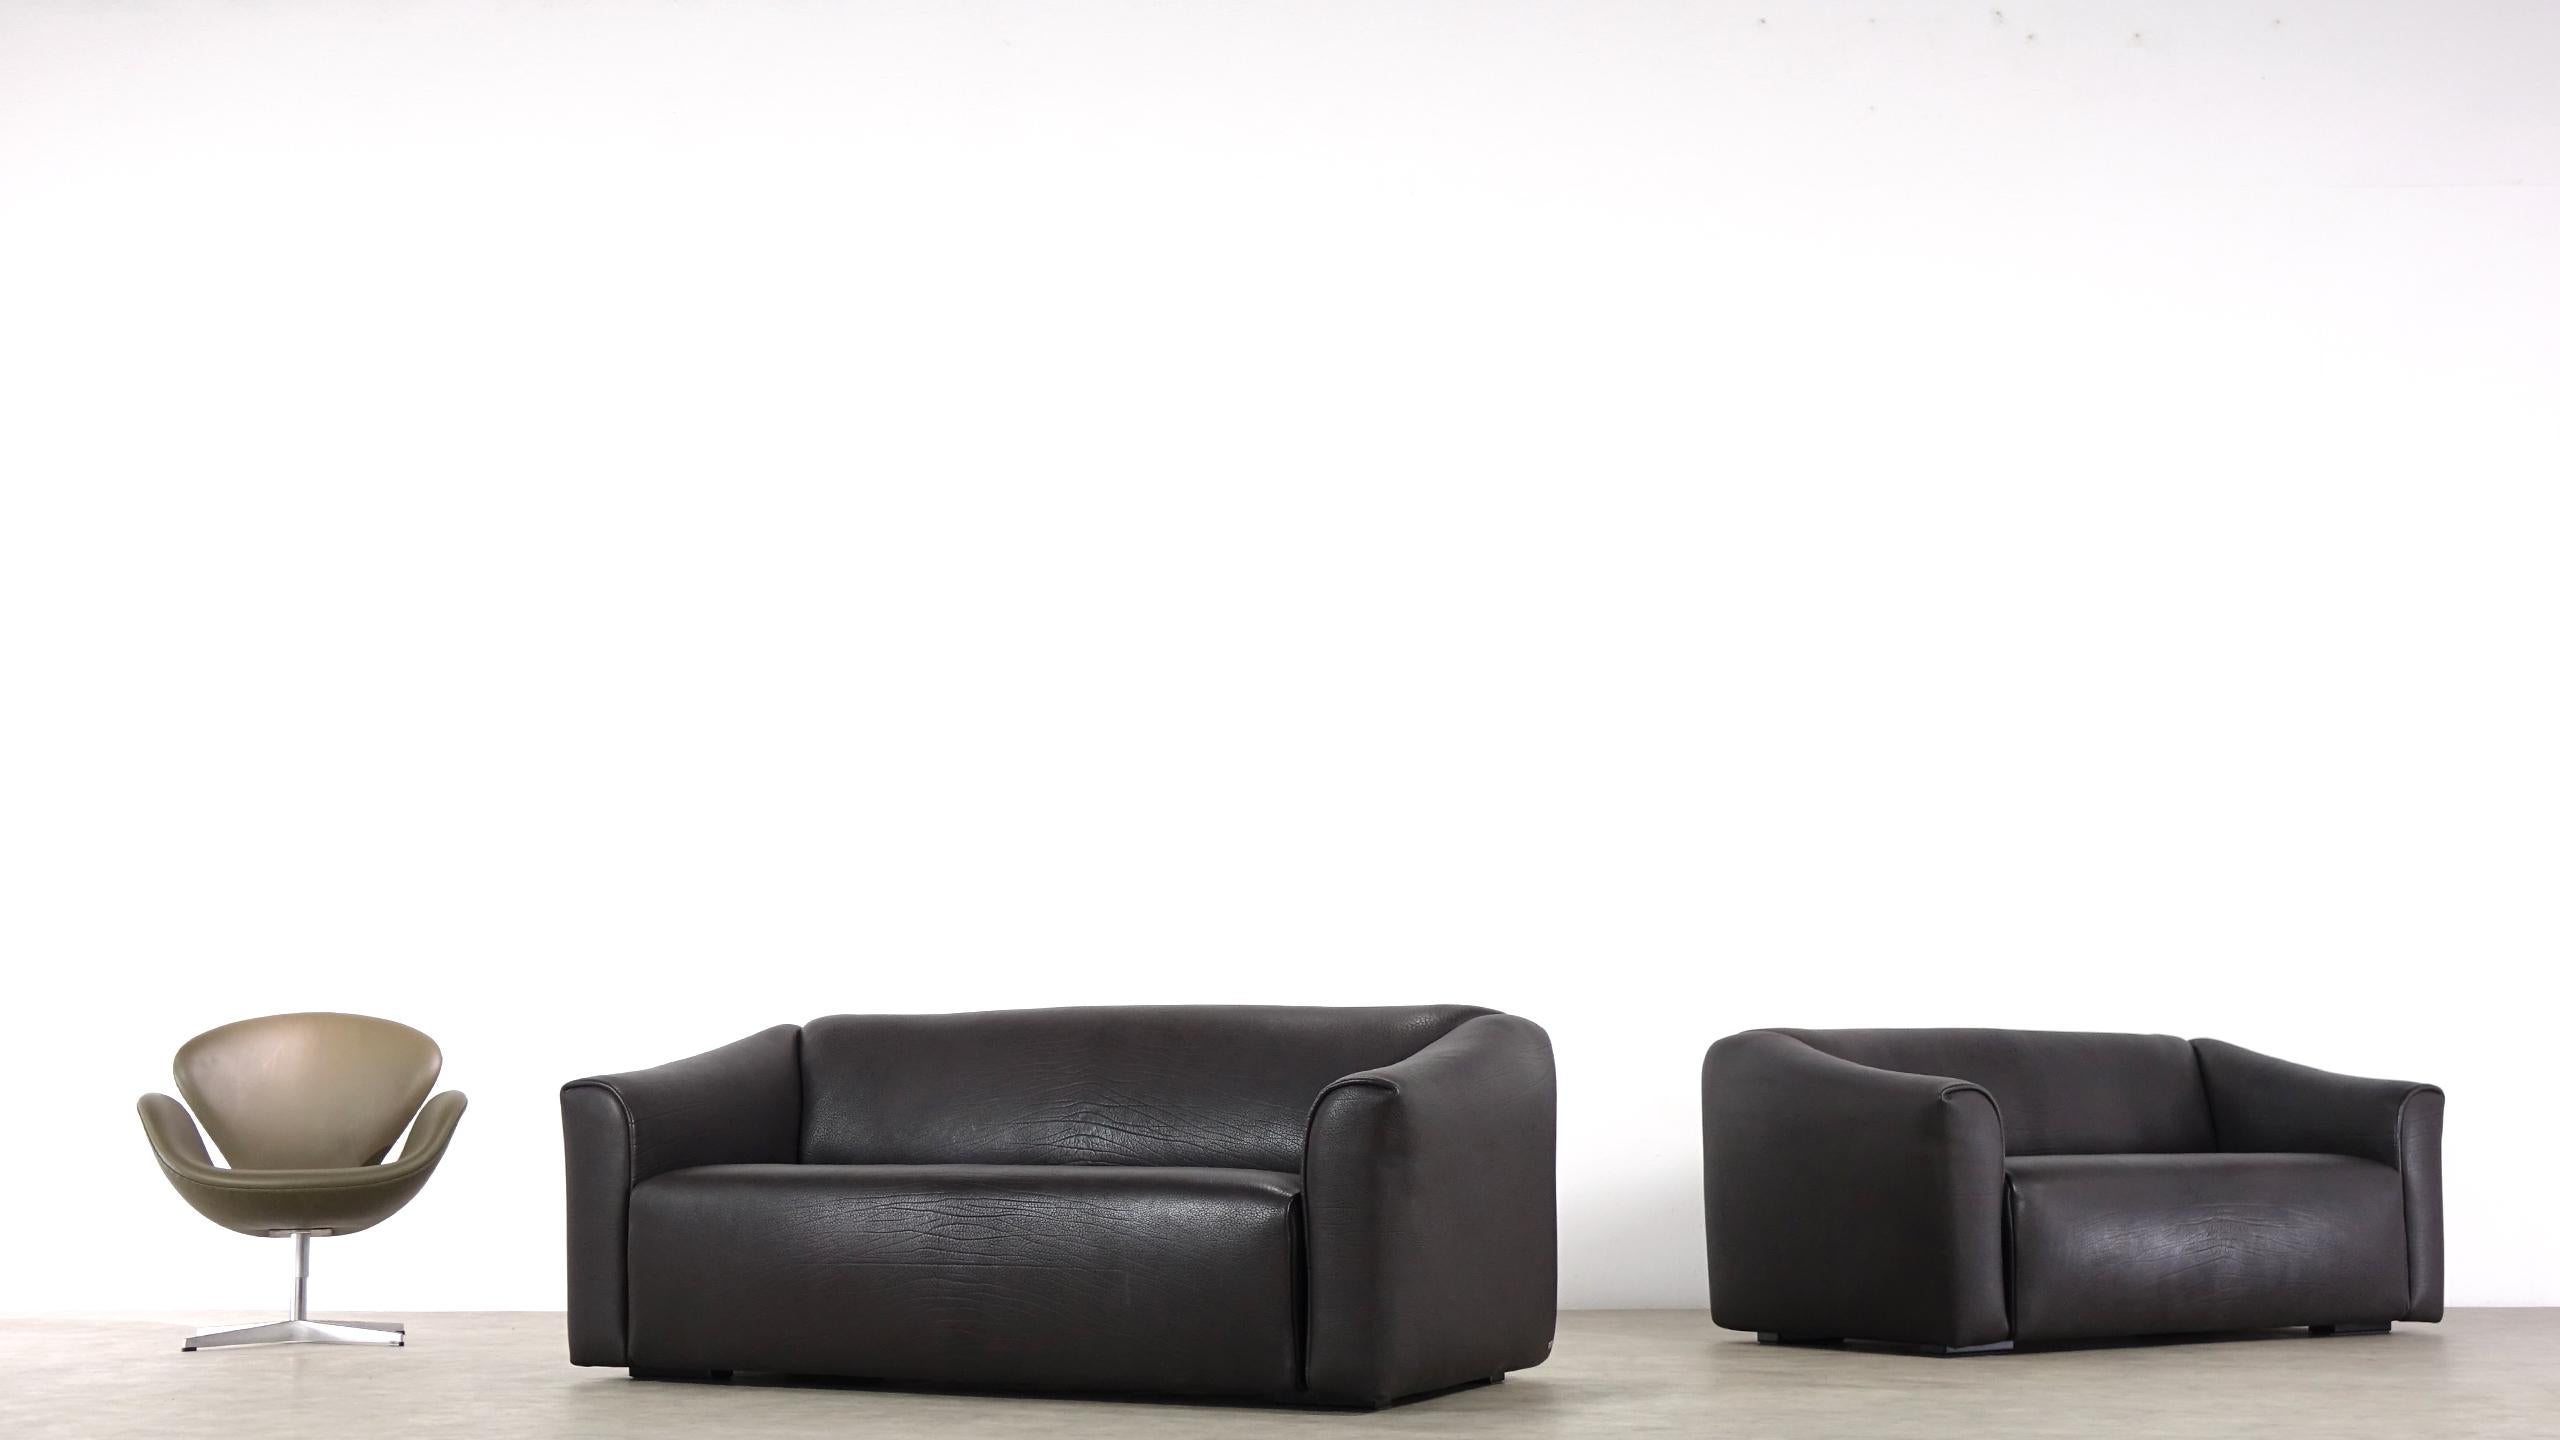 De Sede DS 47 / 3 & DS 42 / 2-seat dark brown buffalo leather. Comfortable and extractable lounge sofa designed and made by De Sede, Switzerland, 1970. The sofas are made of high quality dark brown buffalo leather. De Sede is known for its supreme